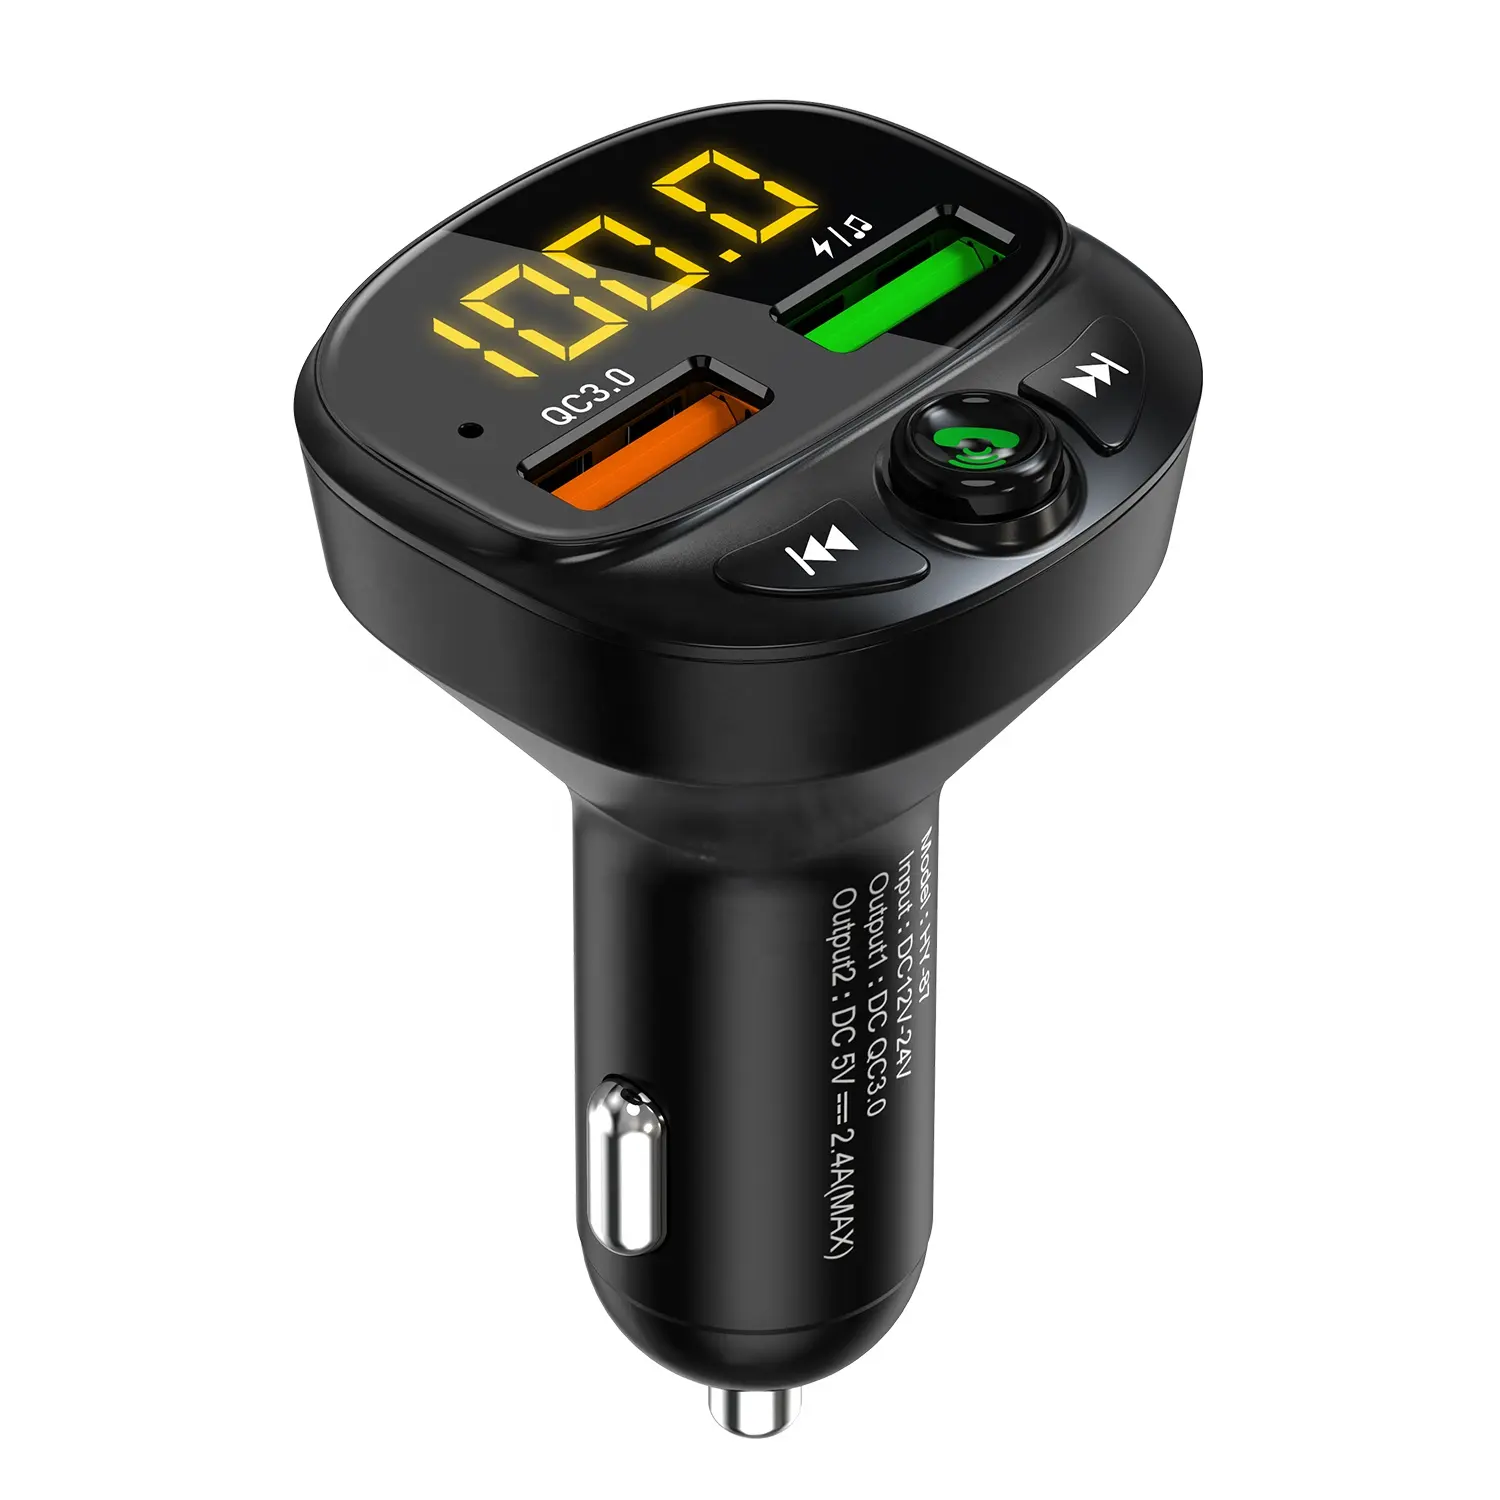 USLION Smartphone Charger Car Kit FM Transmitter Car MP3 Player Dual USB Fast Phone Car Charger Android